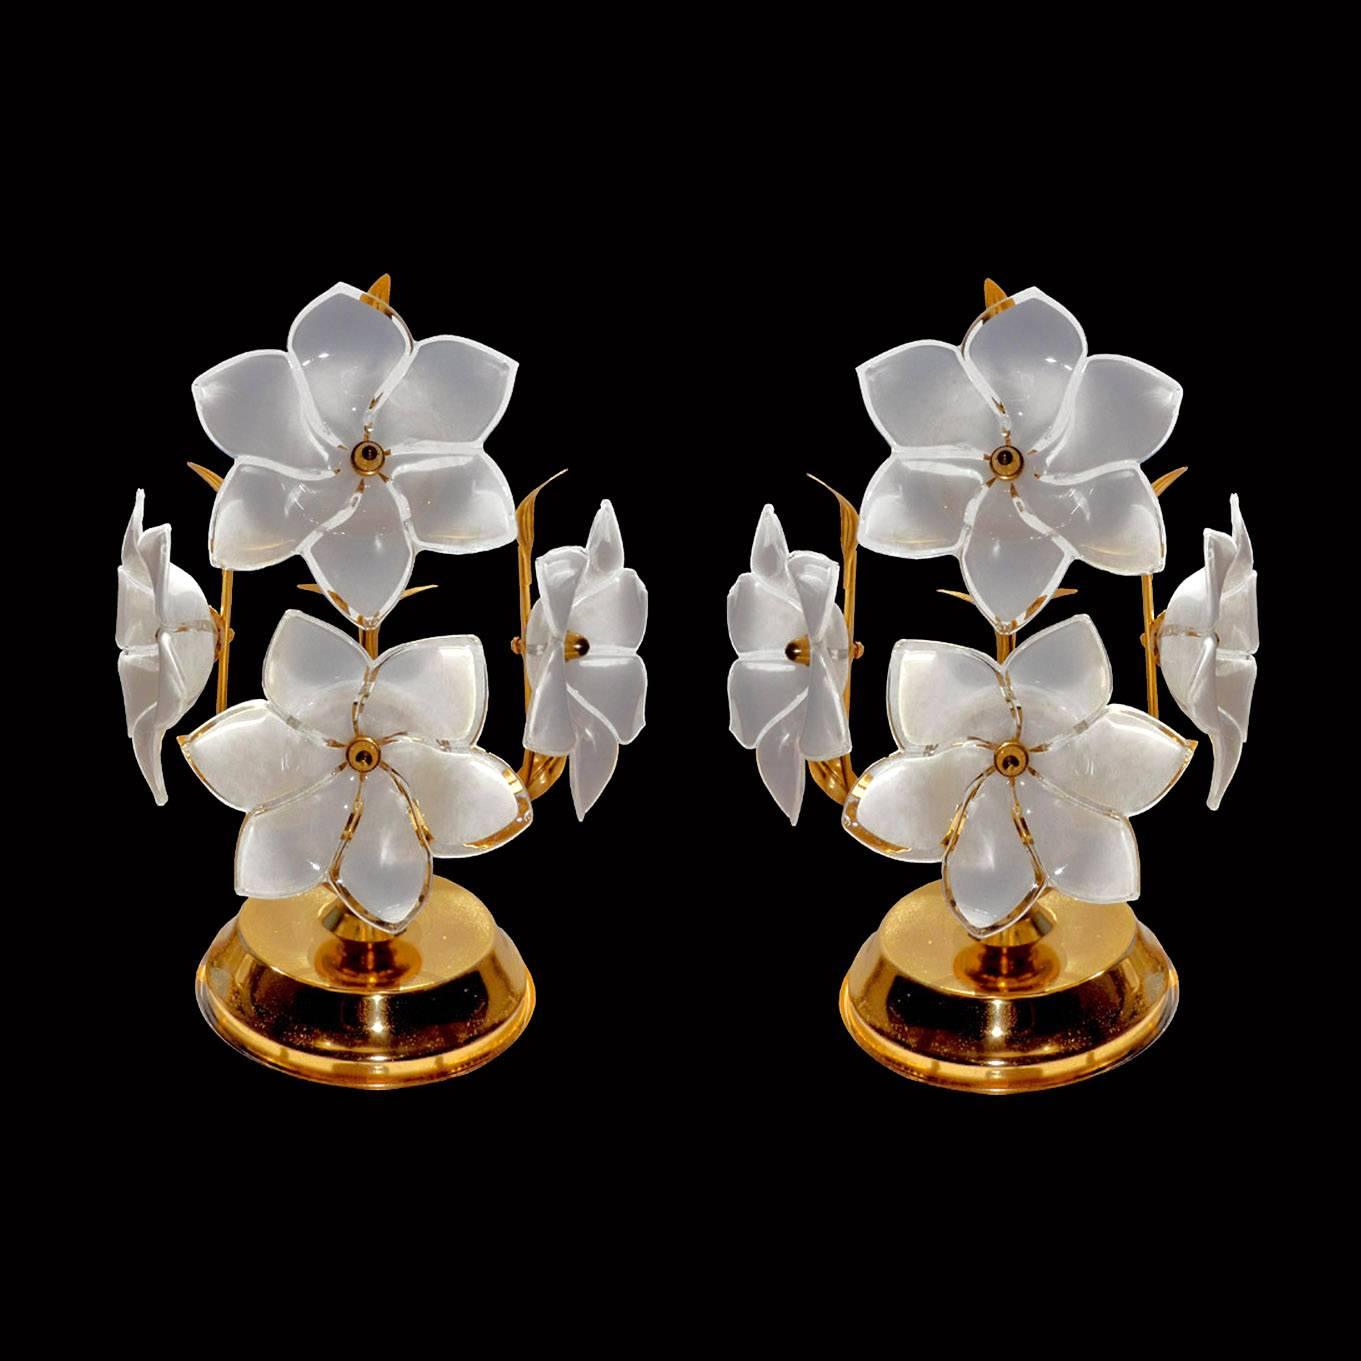 Pair of Italian Venini Murano Era hand blown art glass flowers table lamps/ Mid-Century Modernist/ vintage 1970s
Materials: hand blown glass (white and clear glass) and gold plated metal
Measures:
Height: 12 in /30 cm
Diameter: 9 in /22